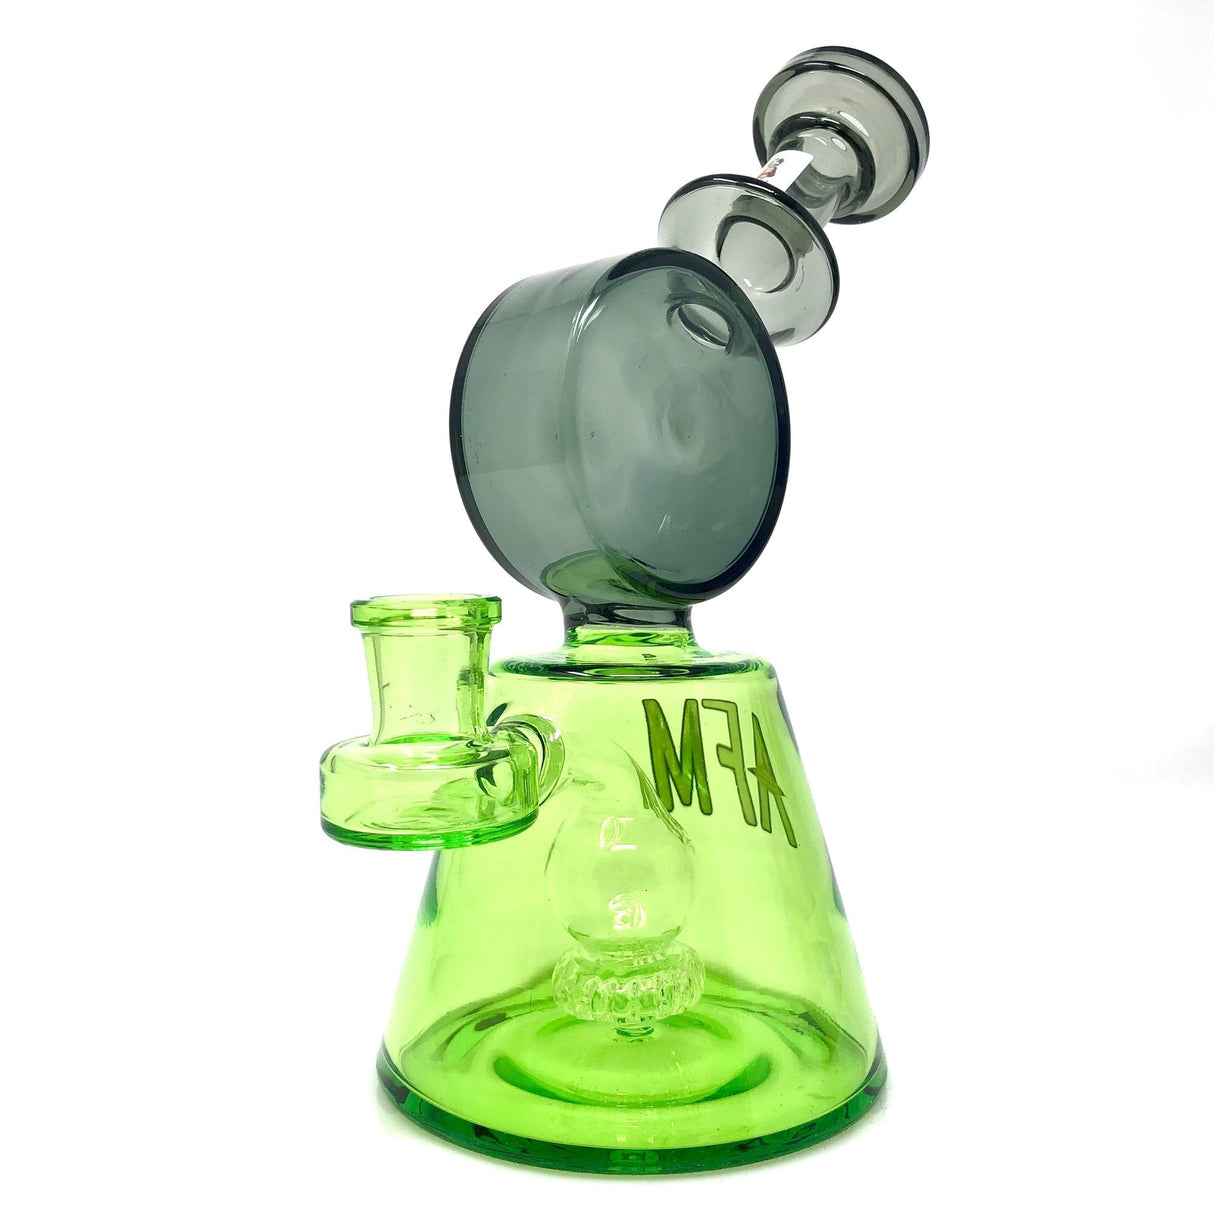 AFM - Falcon Rig in green with Showerhead/UFO percolator, 7.5" height, 14mm joint - Front View